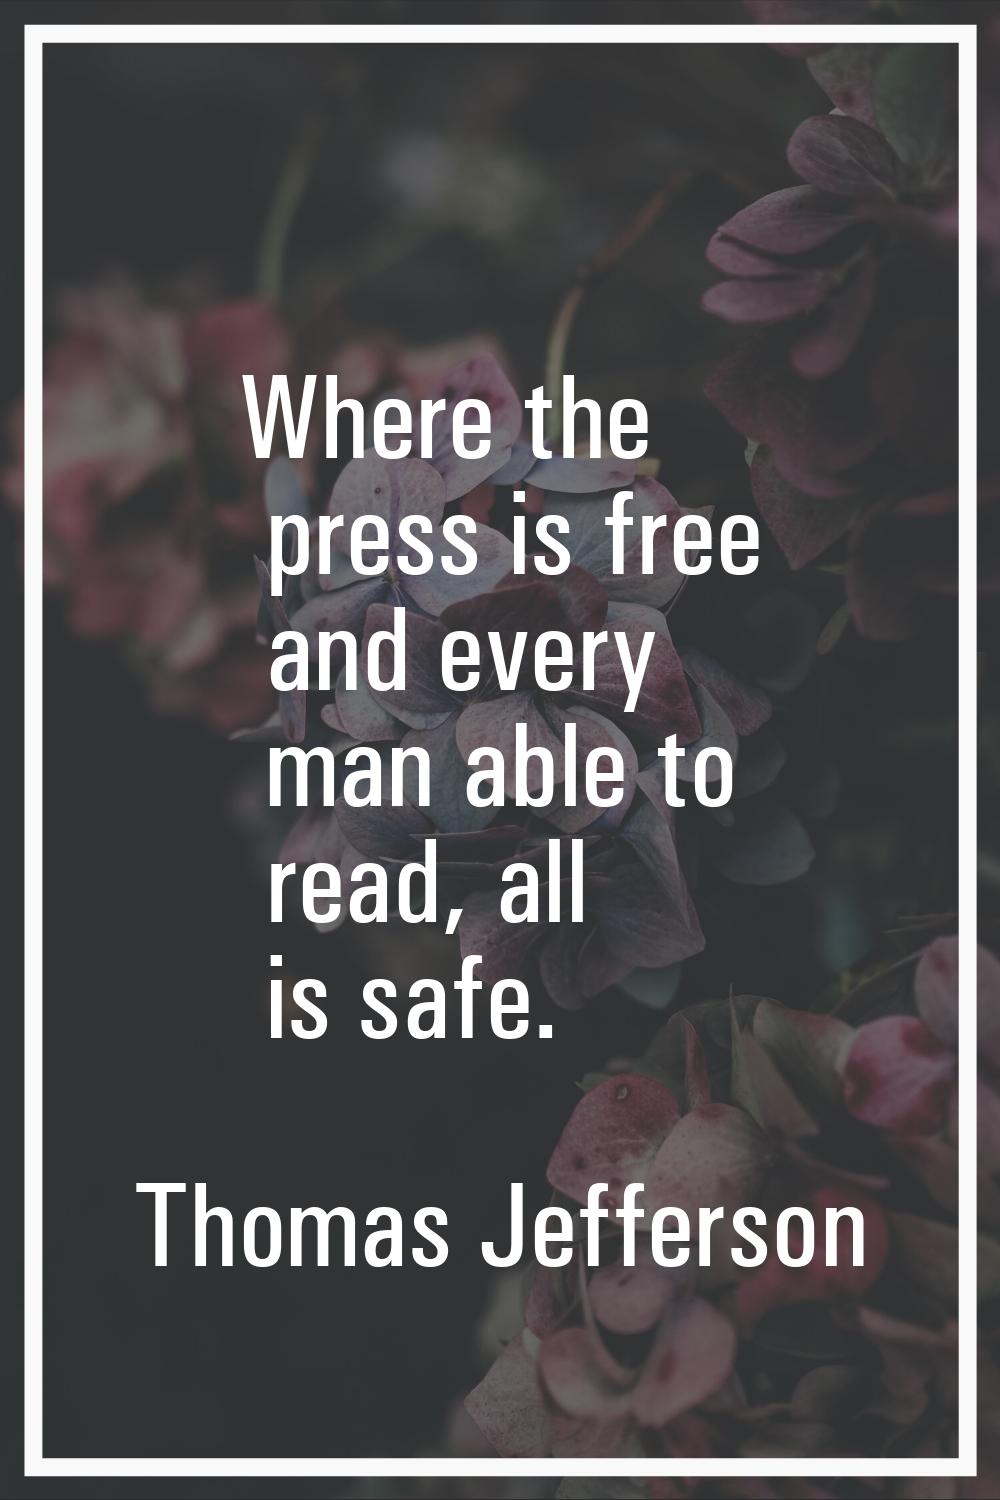 Where the press is free and every man able to read, all is safe.